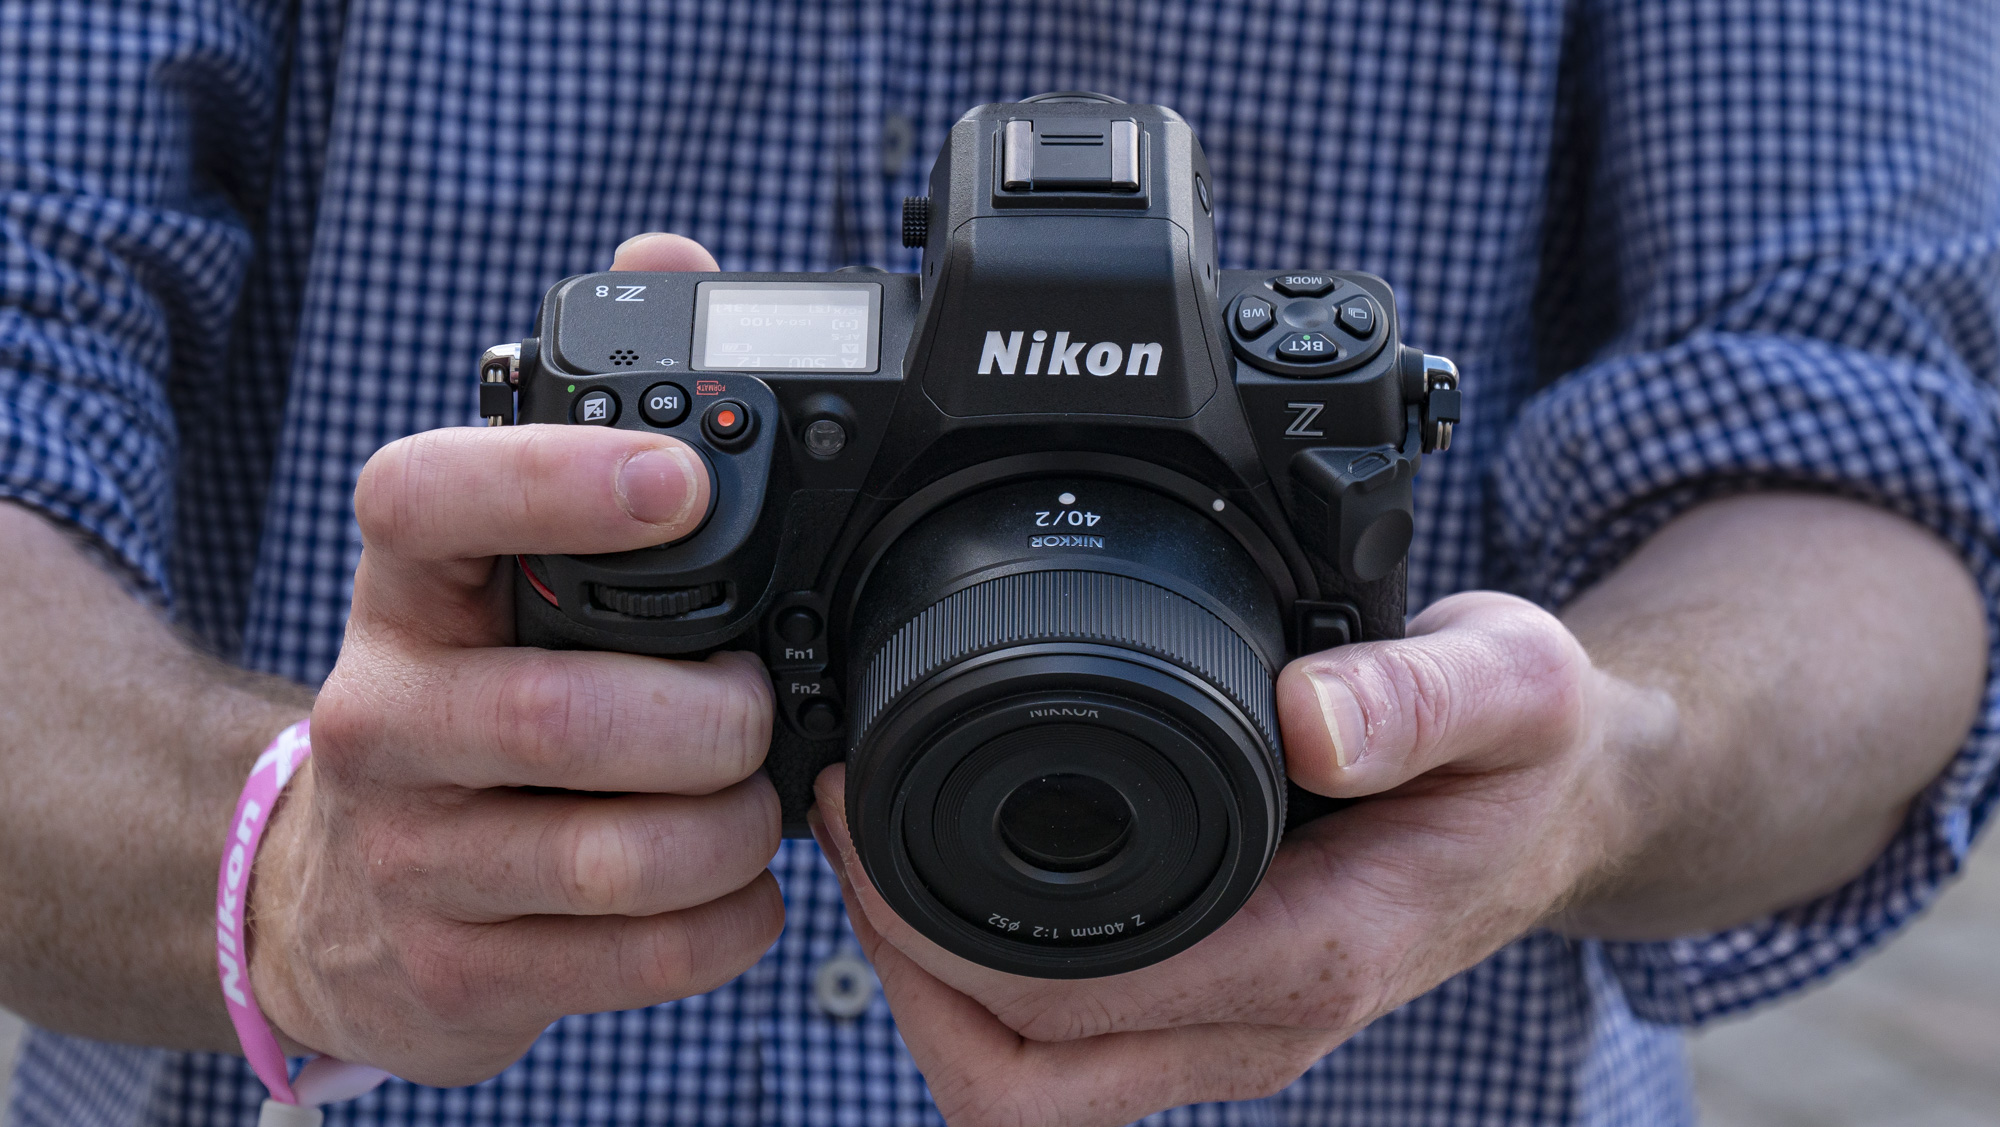 Is the Nikon Z8 the best mirrorless camera yet? 